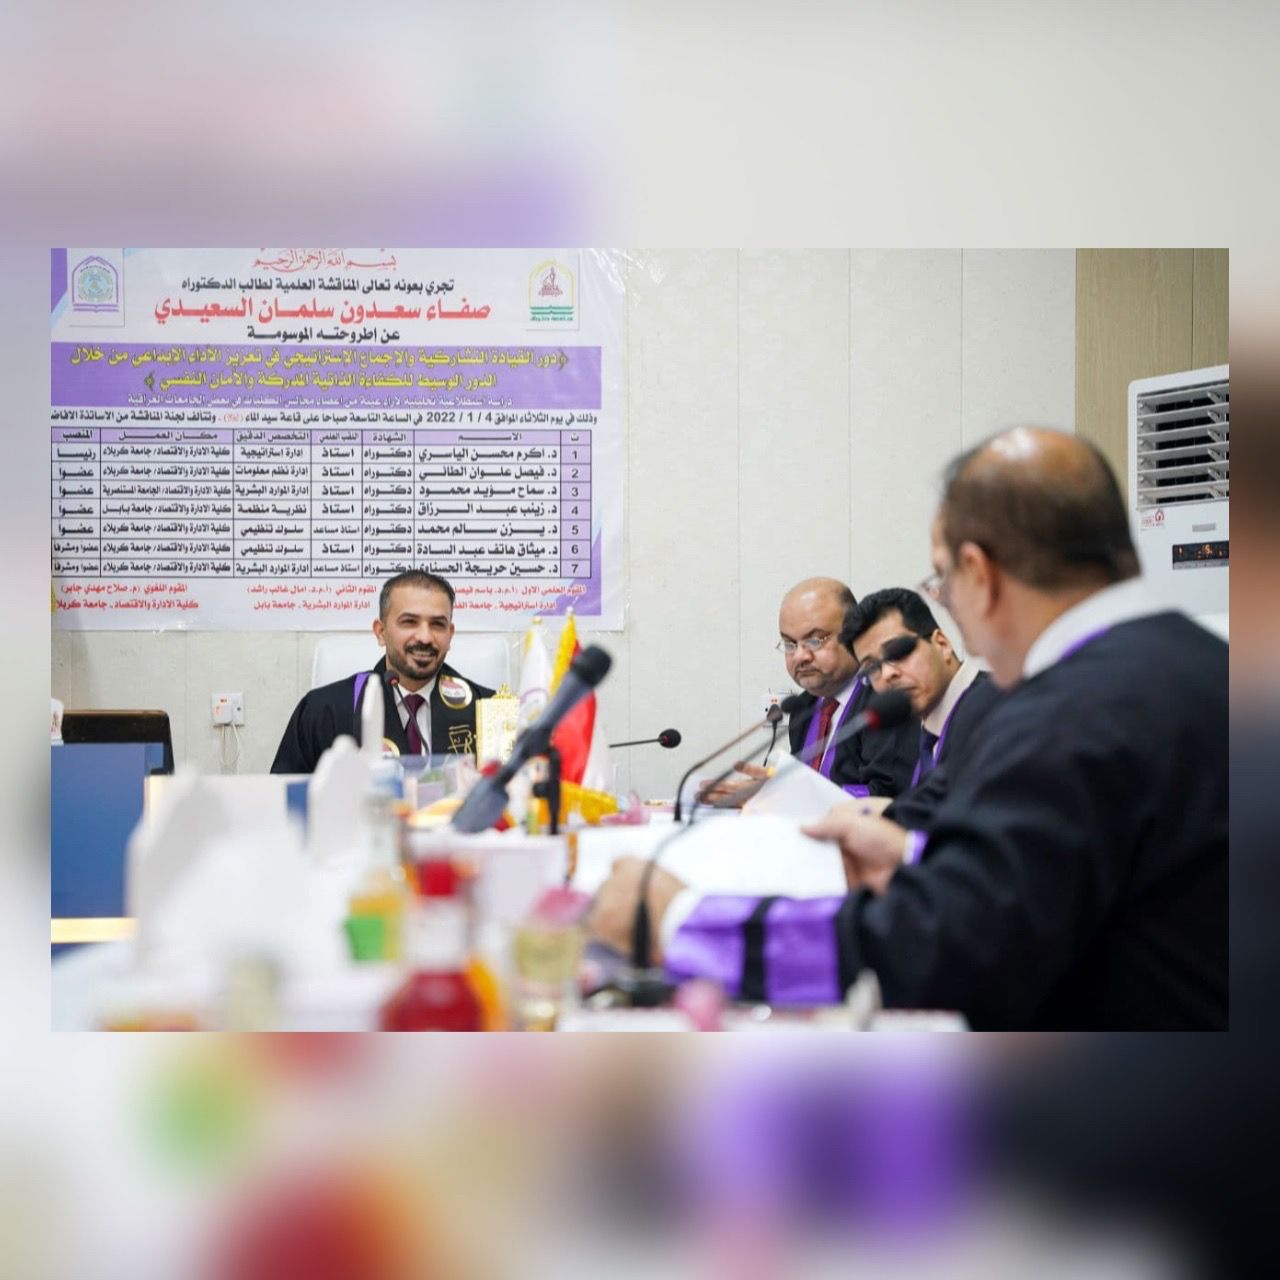 You are currently viewing Karbala University discusses a PH.D.  about The Role of Shared Leadership and Strategic Consensus in enhancing Innovative Performance through the mediating role of Perceived self-efficacy and psychological safety